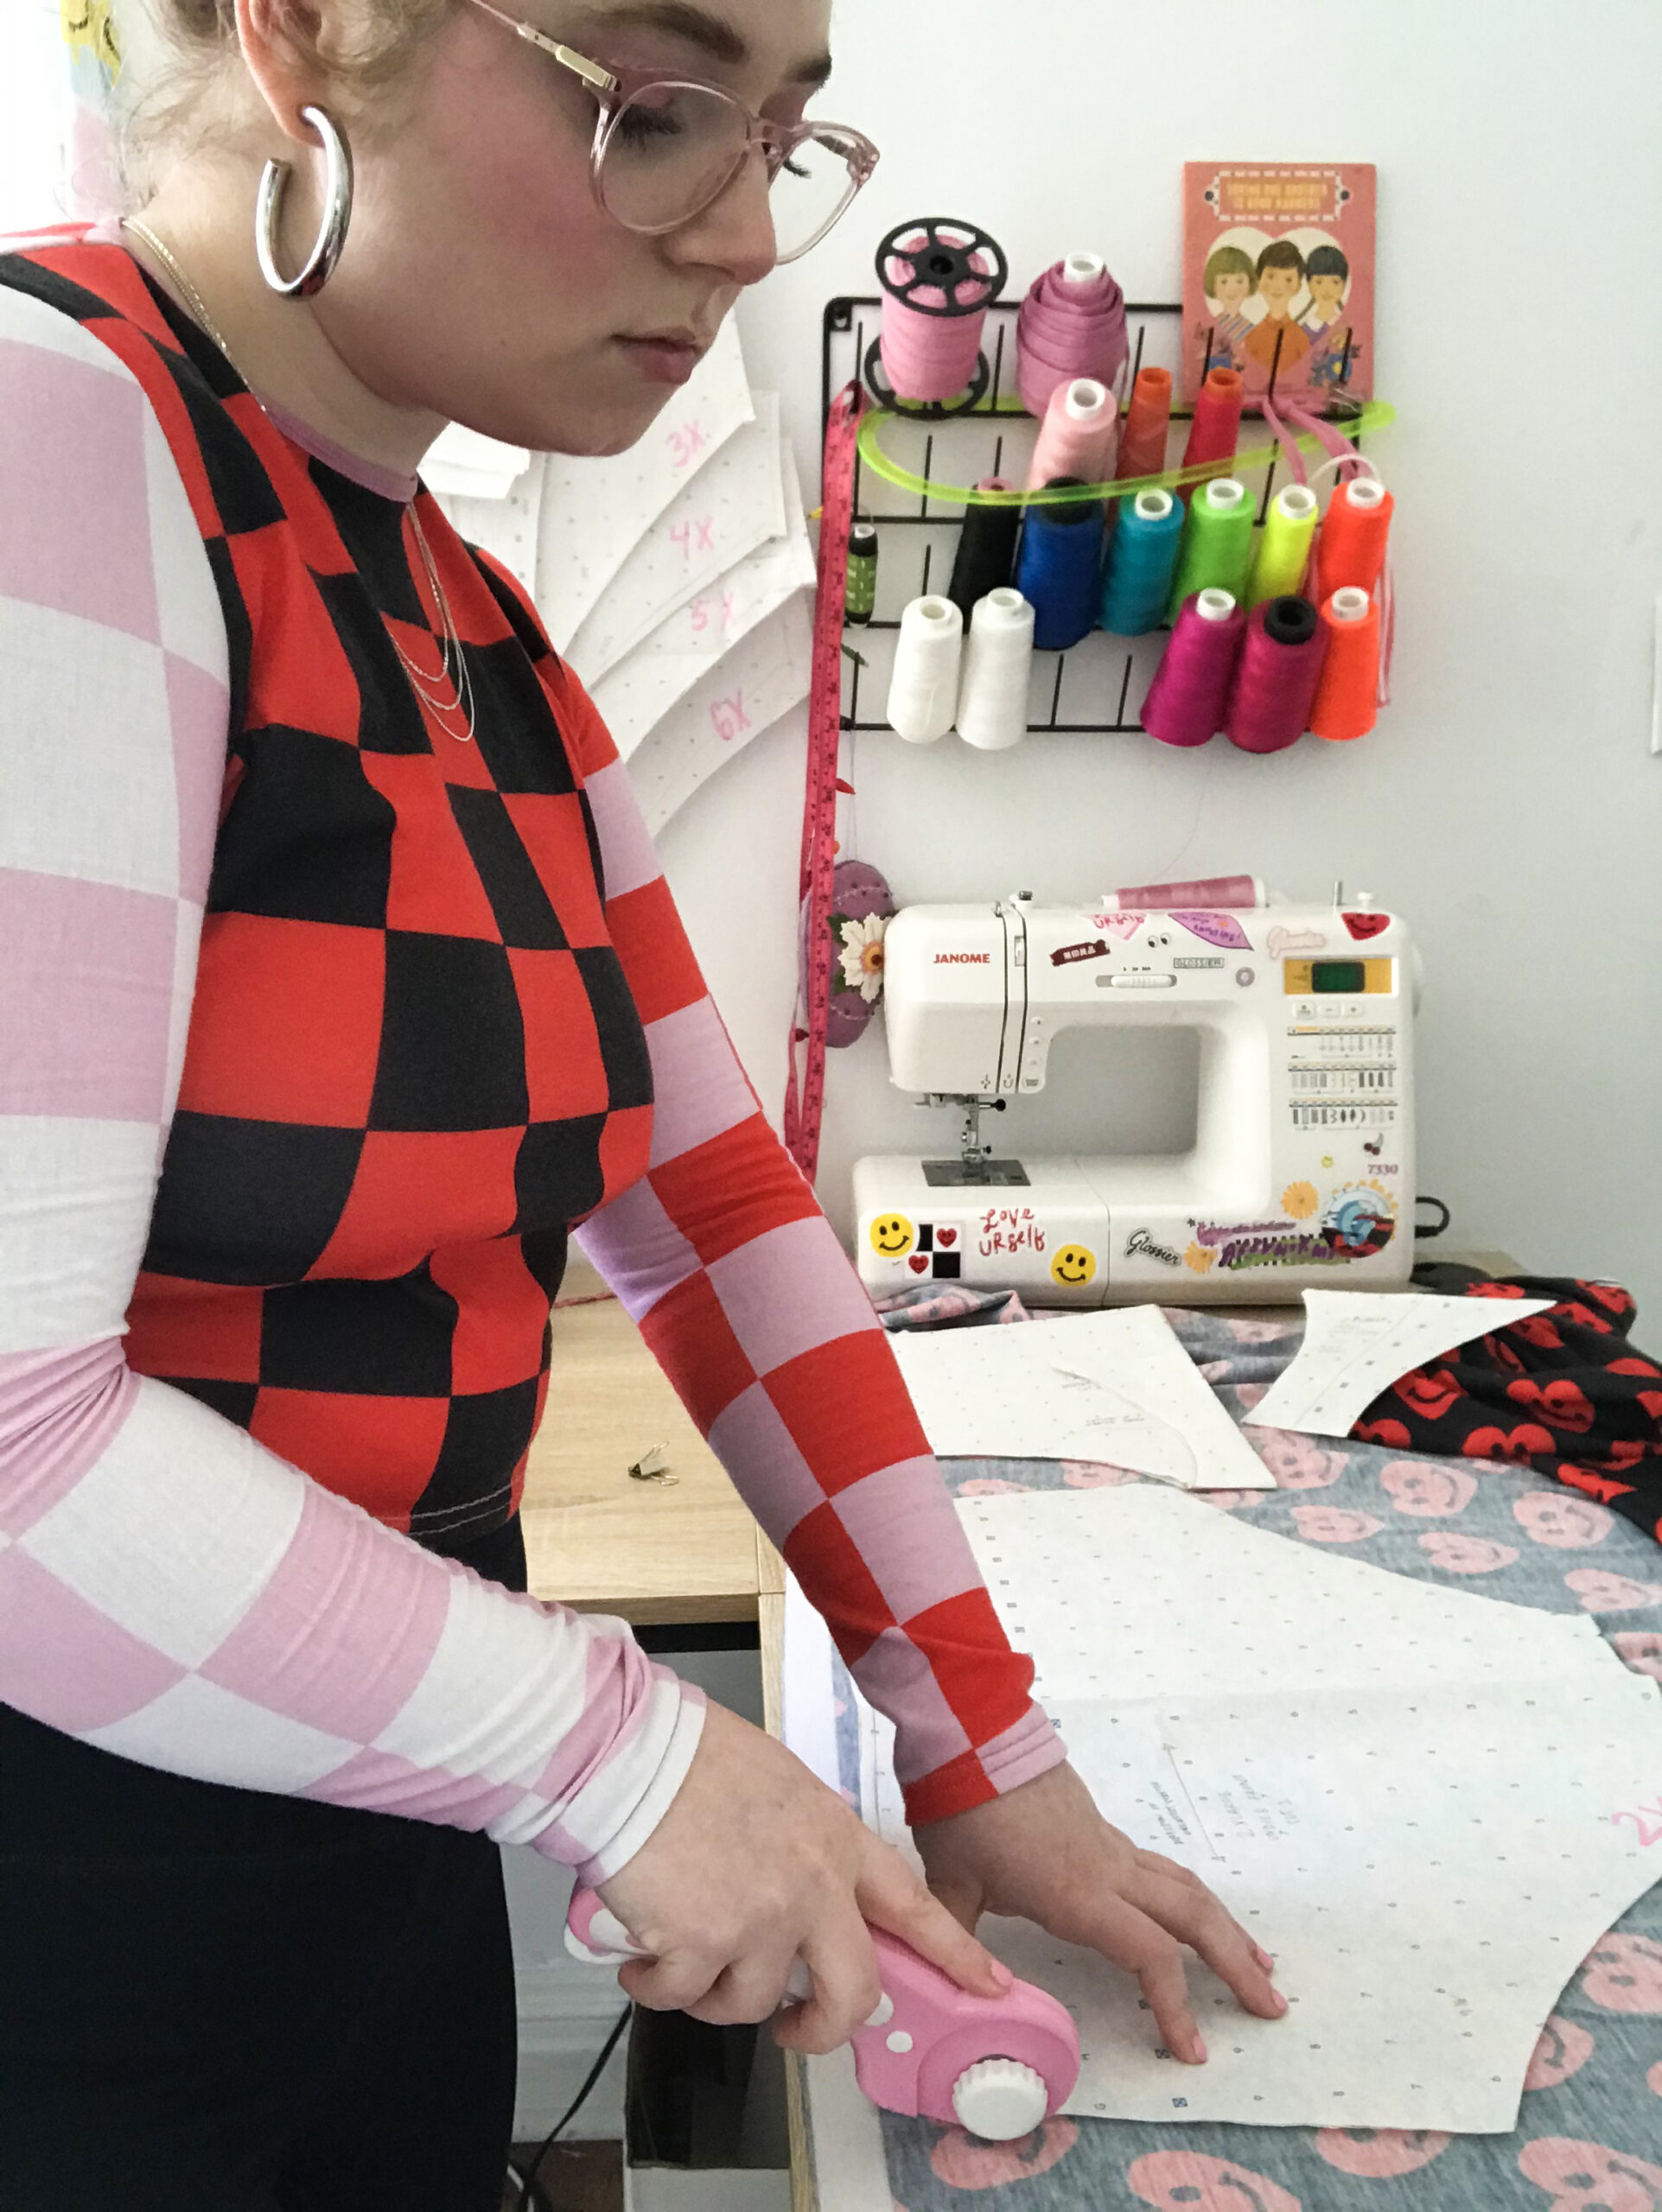 Bouncy Frown Studios founder Abby Mosse working on a pattern